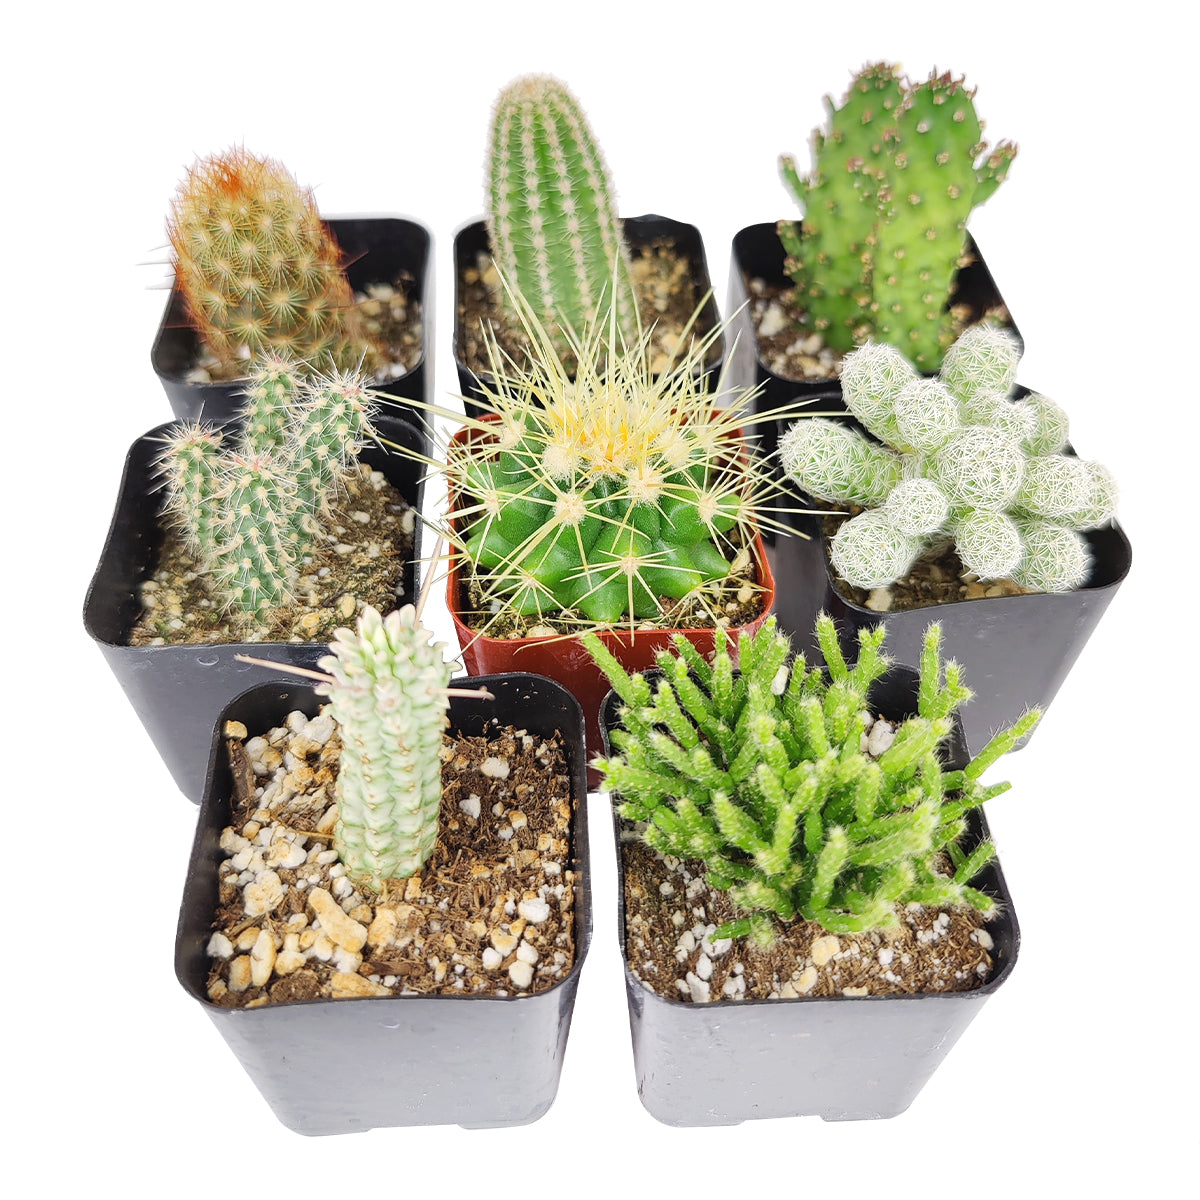 Cutest Little Mini Cactus Pack for sale, Live Cactus Assorted Pack for sale, A Variety of Healthy Live Cactus, How to care for Cactus plant, How to grow Cactus succulent , cactus, cactus succulent, succulent cactus, cacti, cactus and succulents, succulents box, succulent shop, buy succulents online